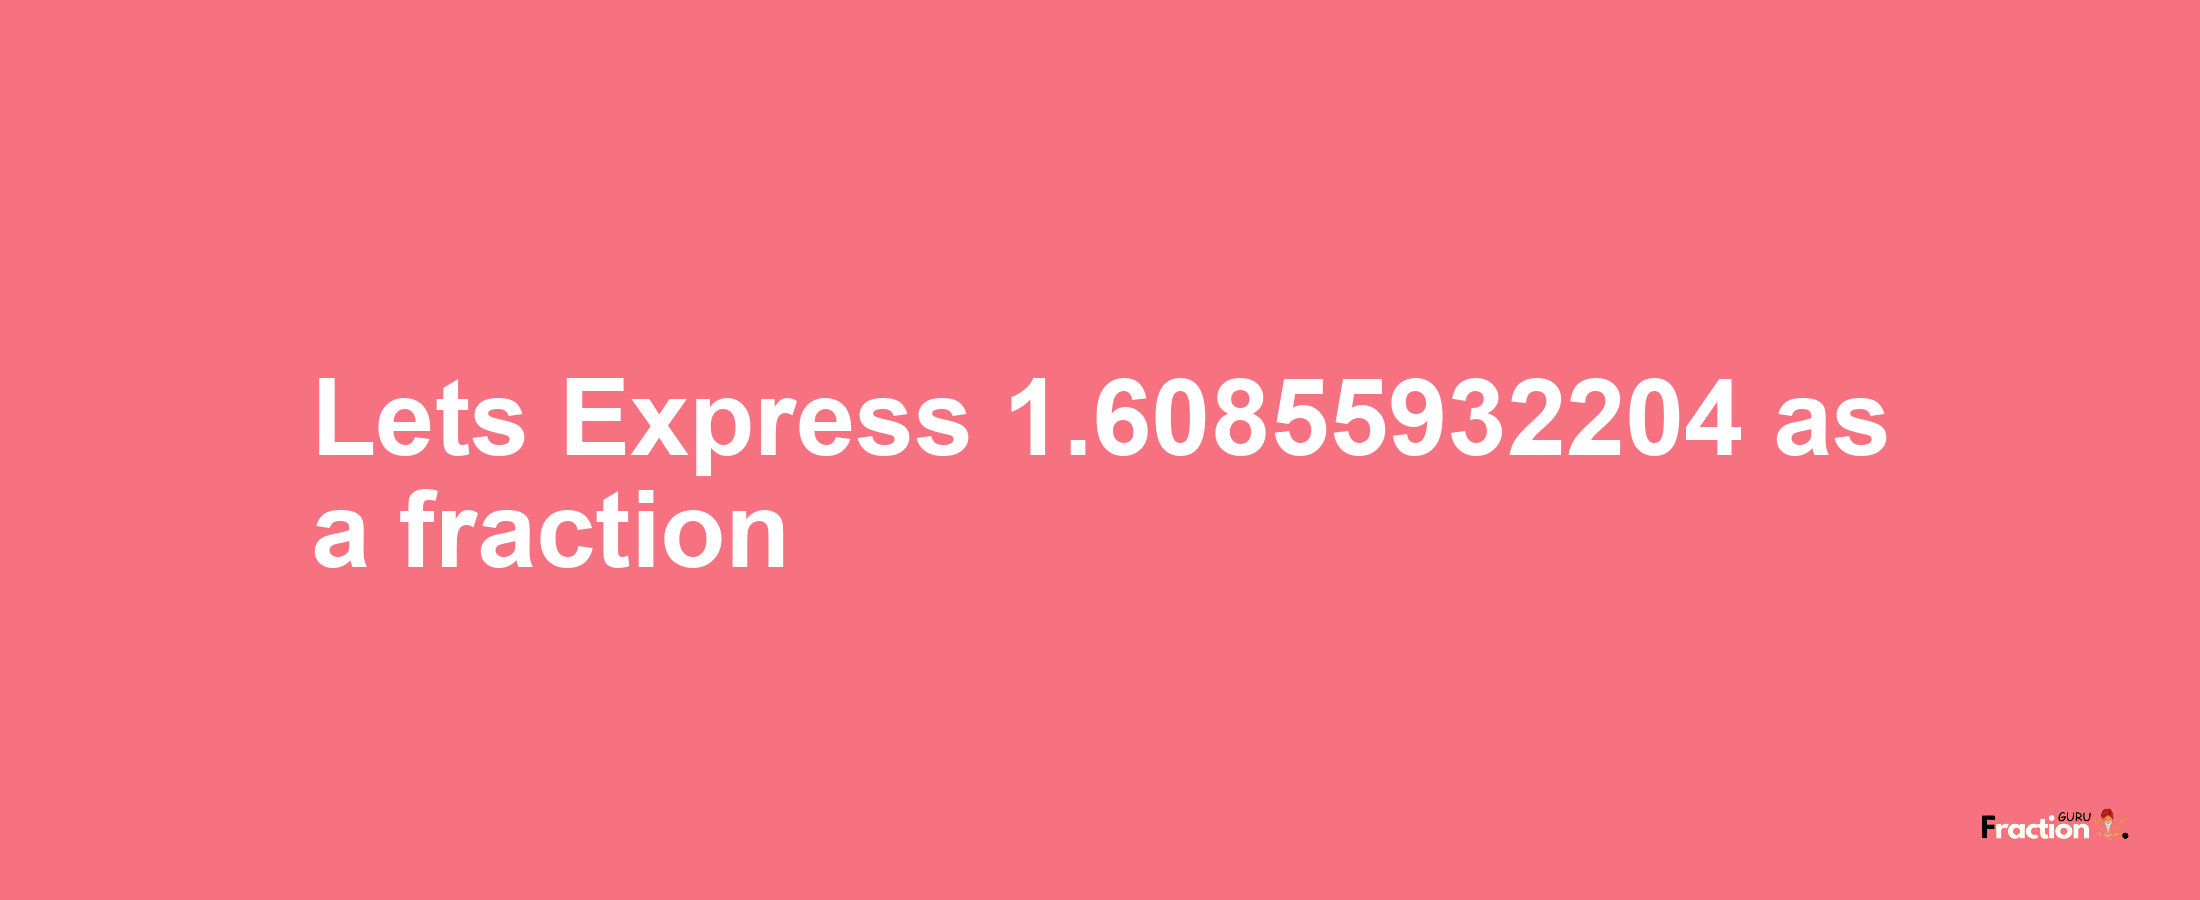 Lets Express 1.60855932204 as afraction